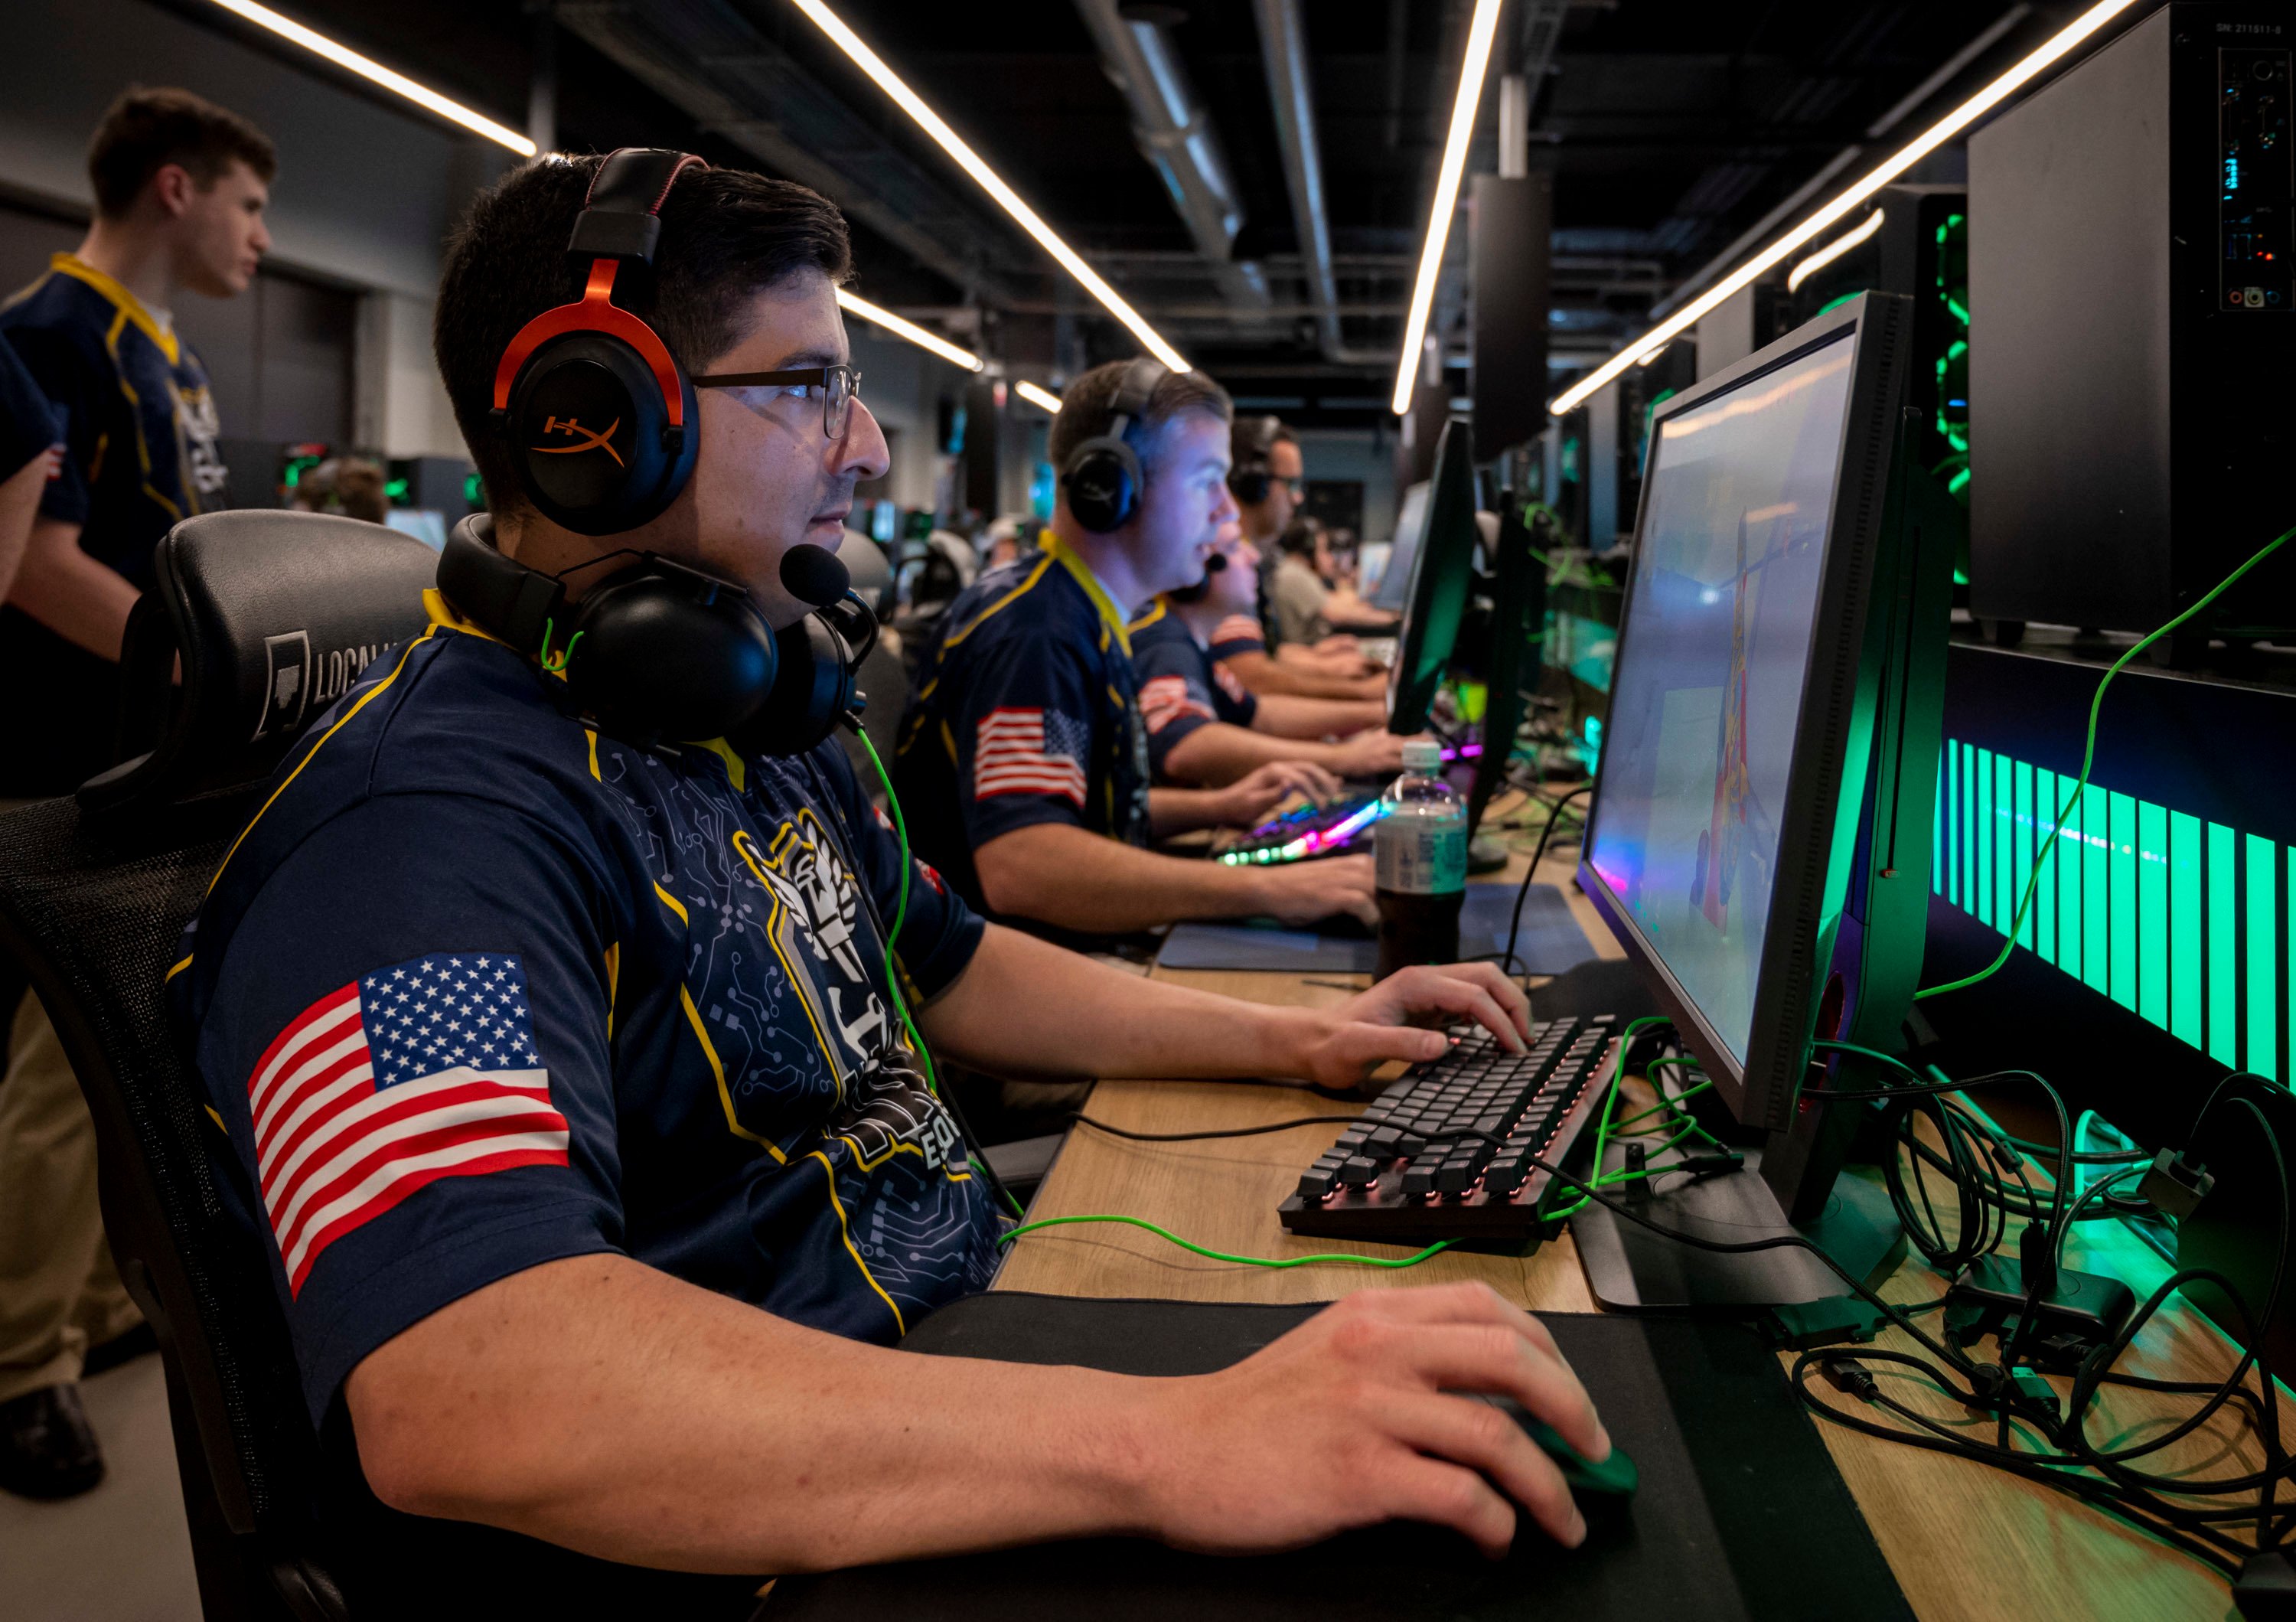 WANTED Gamer Sailors for Navys Goats and Glory ESports Team